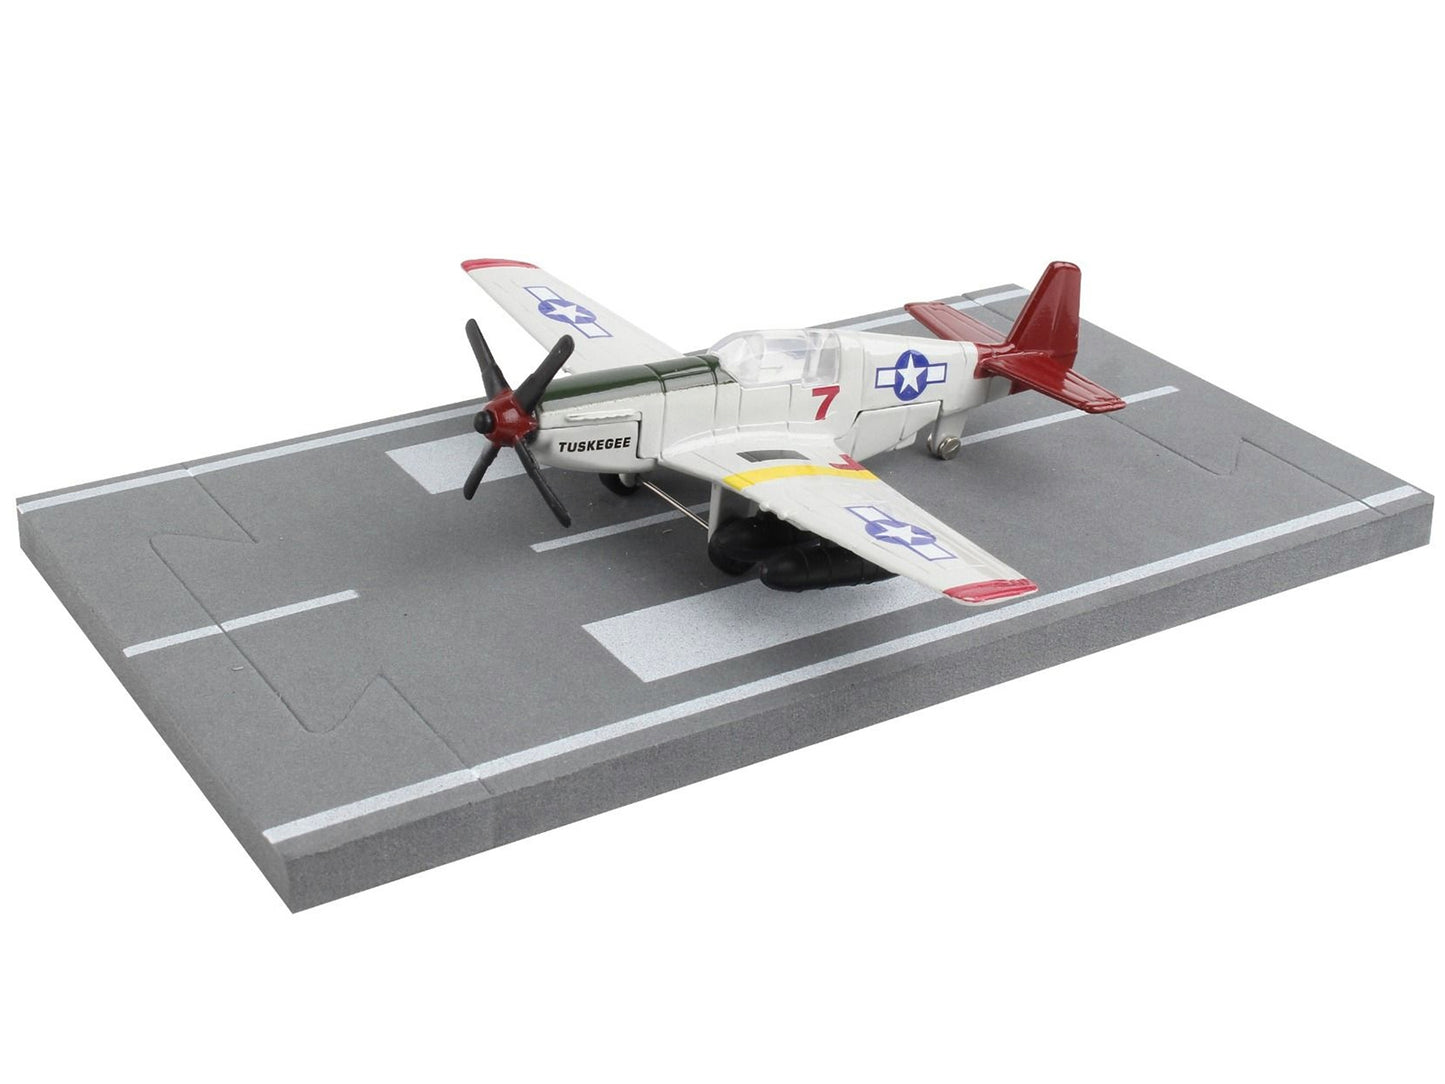 North American P-51C Mustang Fighter Aircraft Gray "Tuskegee Airmen-United States Army Air Force" with Runway Section Diecast Model Airplane by Runway24